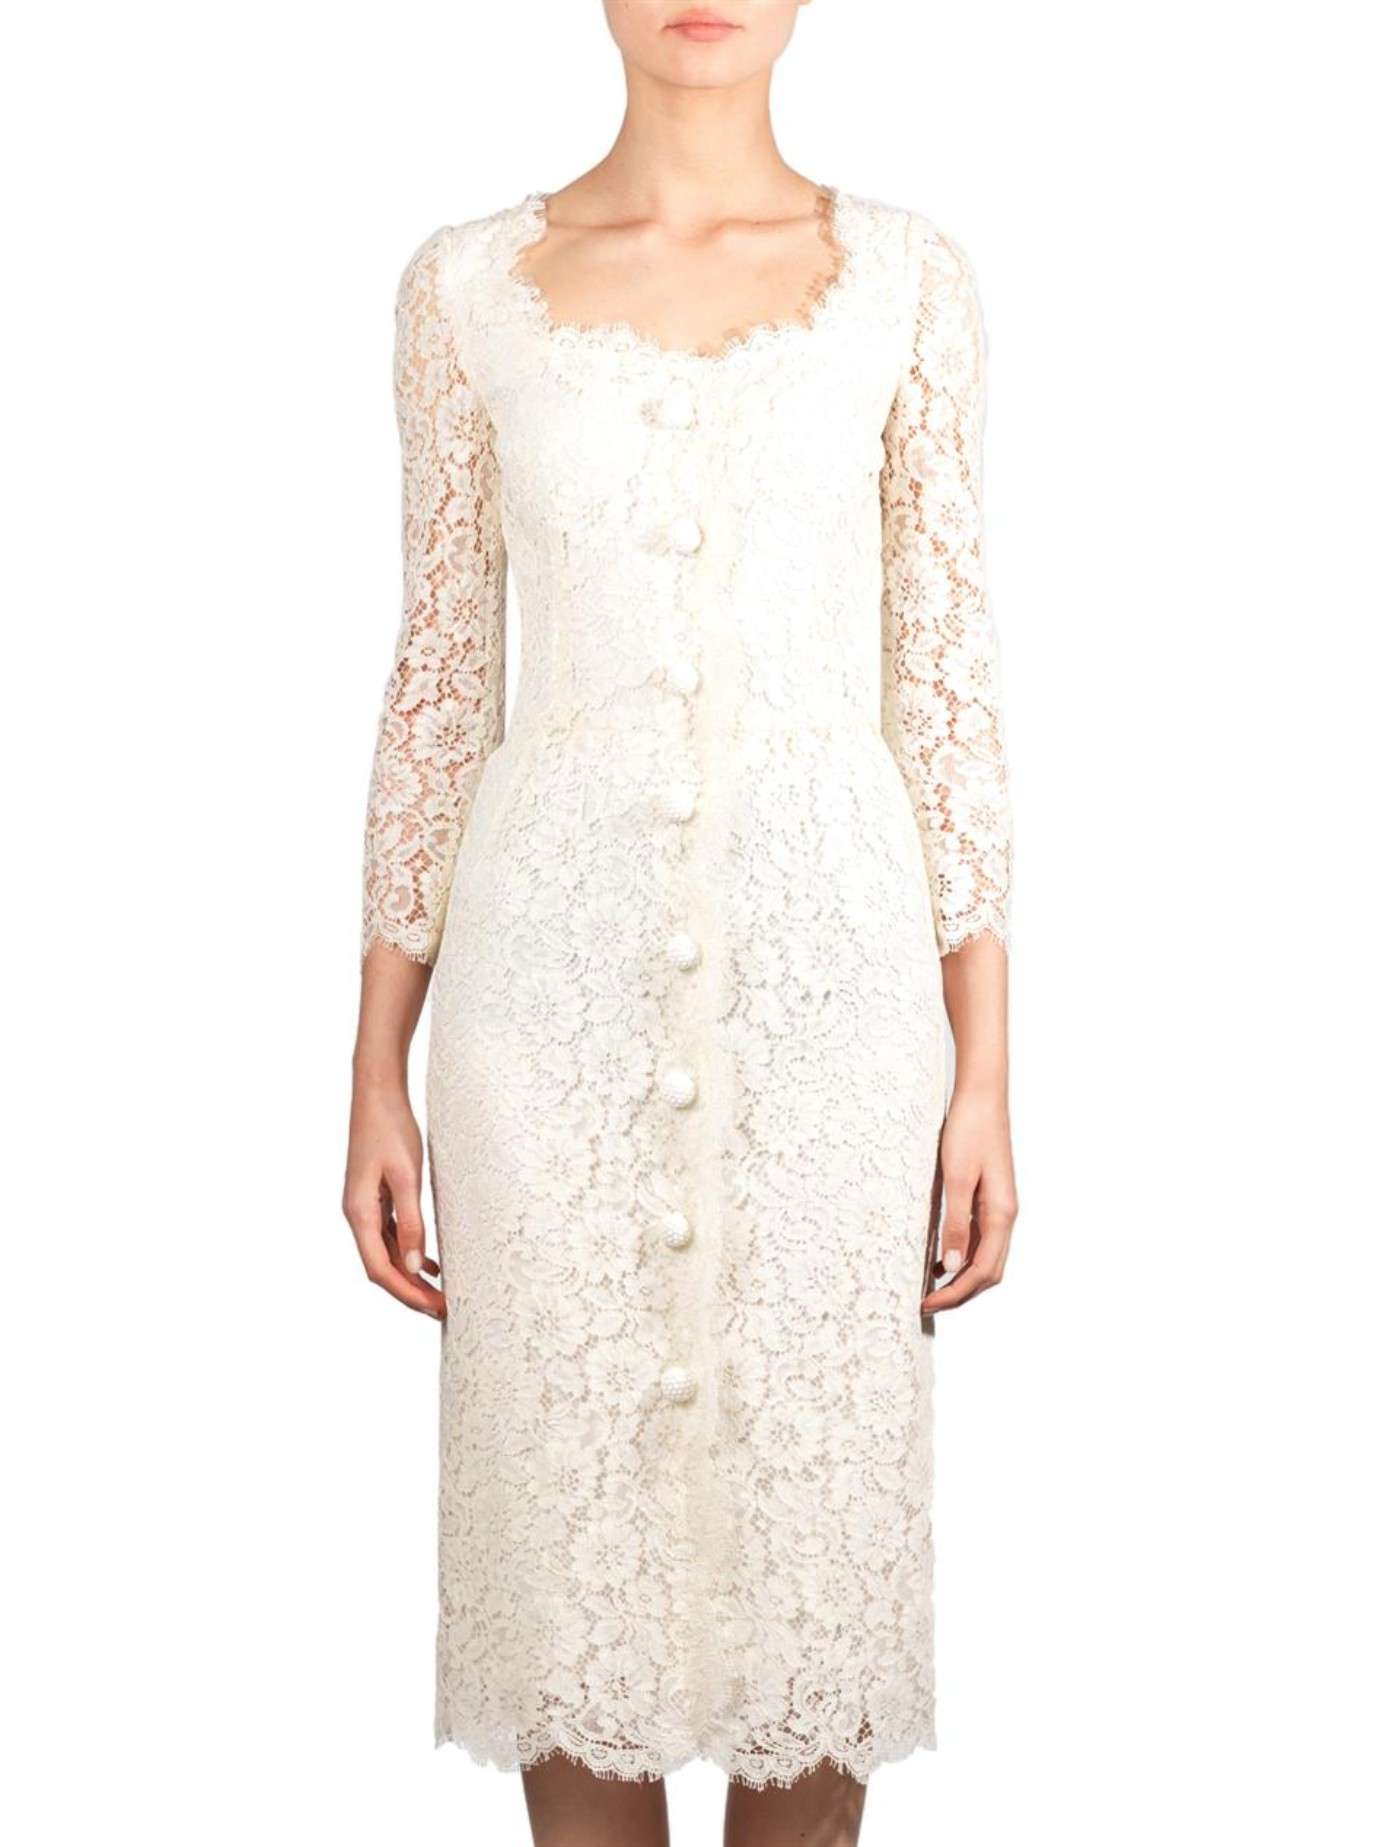 Dolce & Gabbana Lace Button-Through Dress in White | Lyst